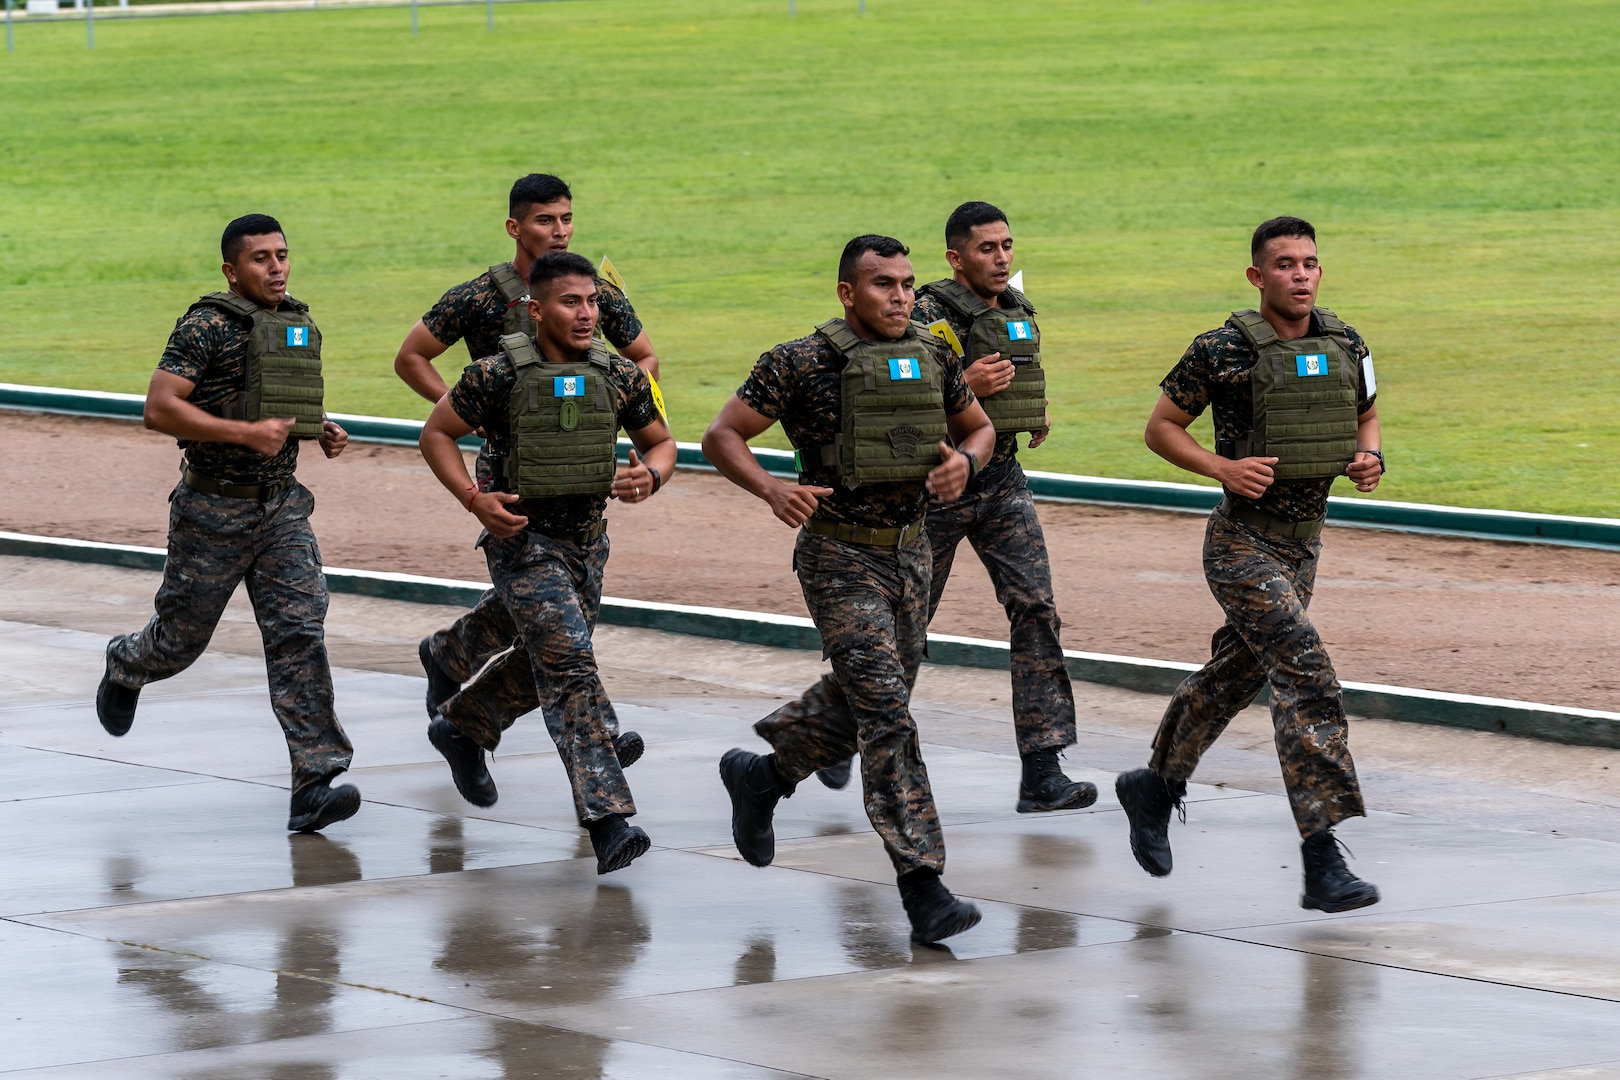 Guatemala team members run as part of the first event for Fuerzas Comando 2022, the Physical Training Test, on June 13, 2022, in Tegucigalpa, Honduras.